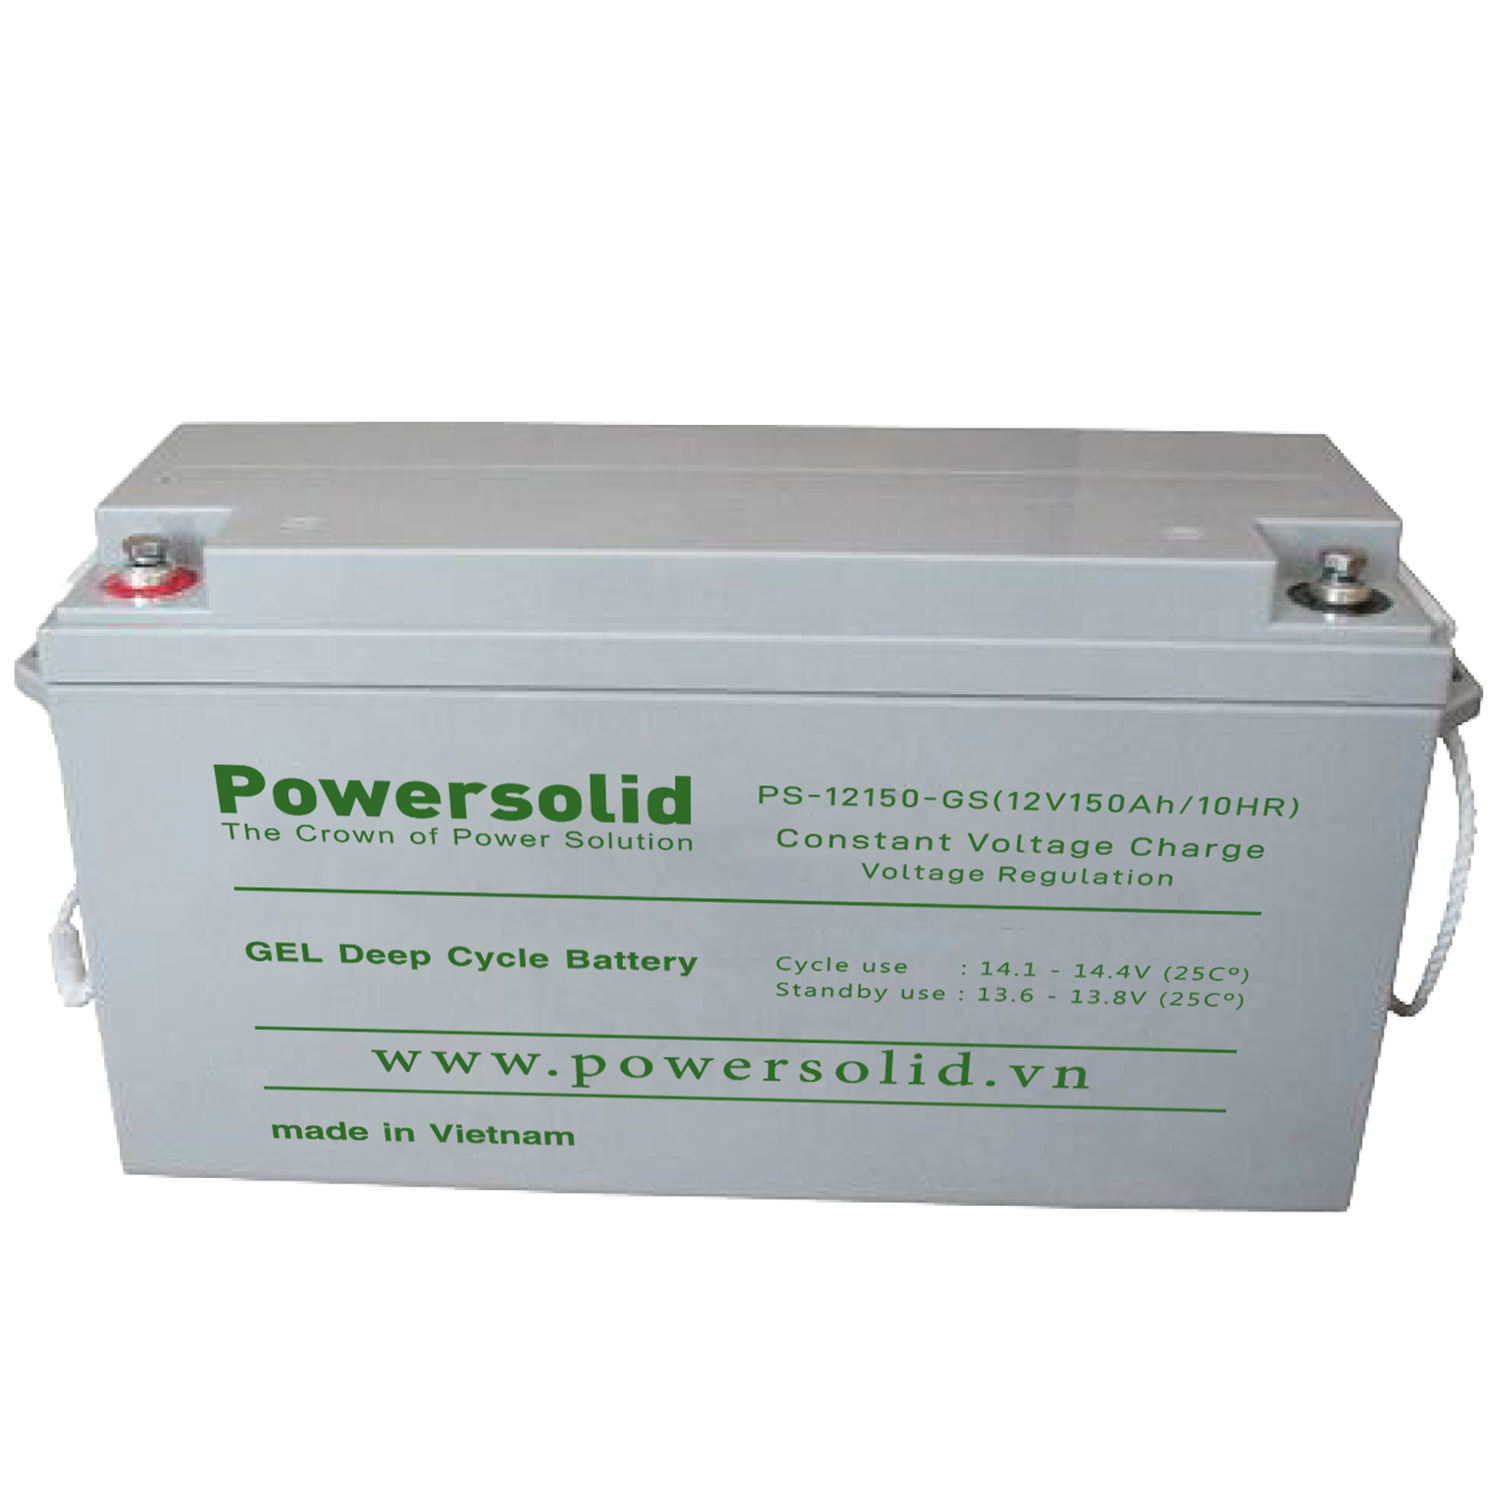 Power Solid PS-121500-GS GEL Deep Cycle Battery 12V 150Ah